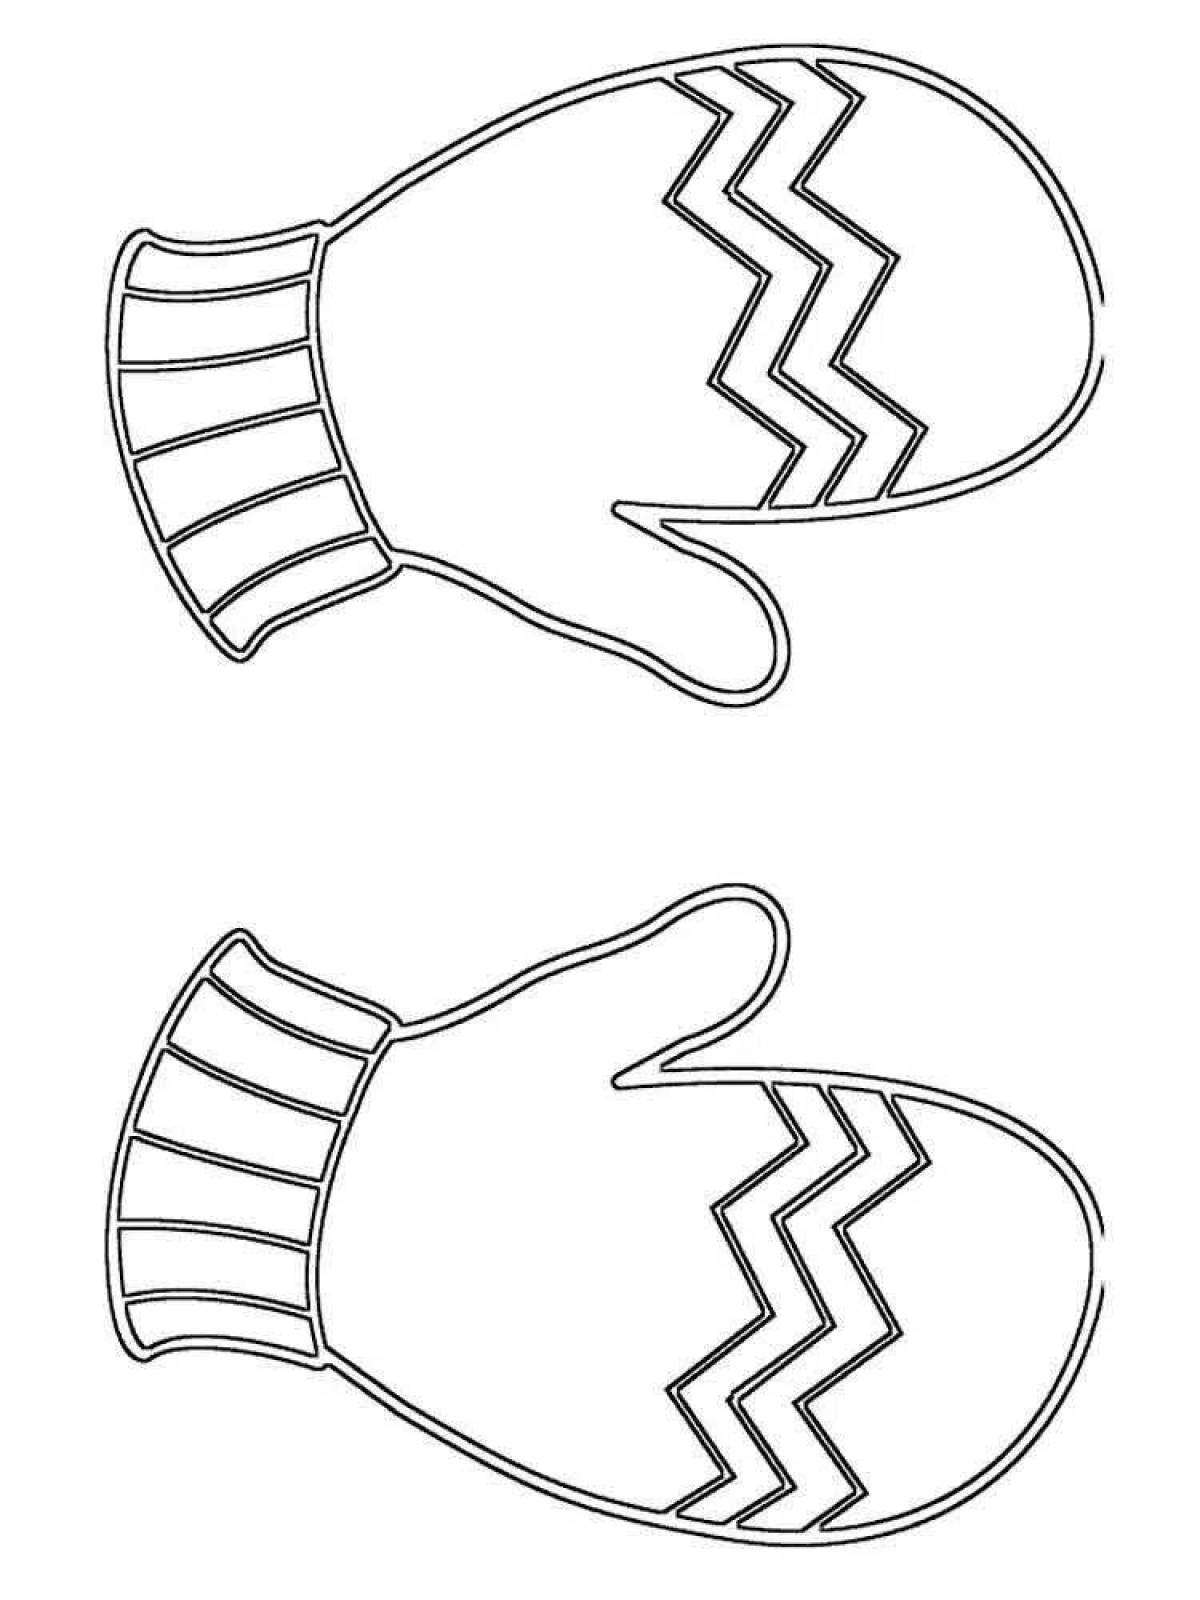 Luminous mittens coloring page